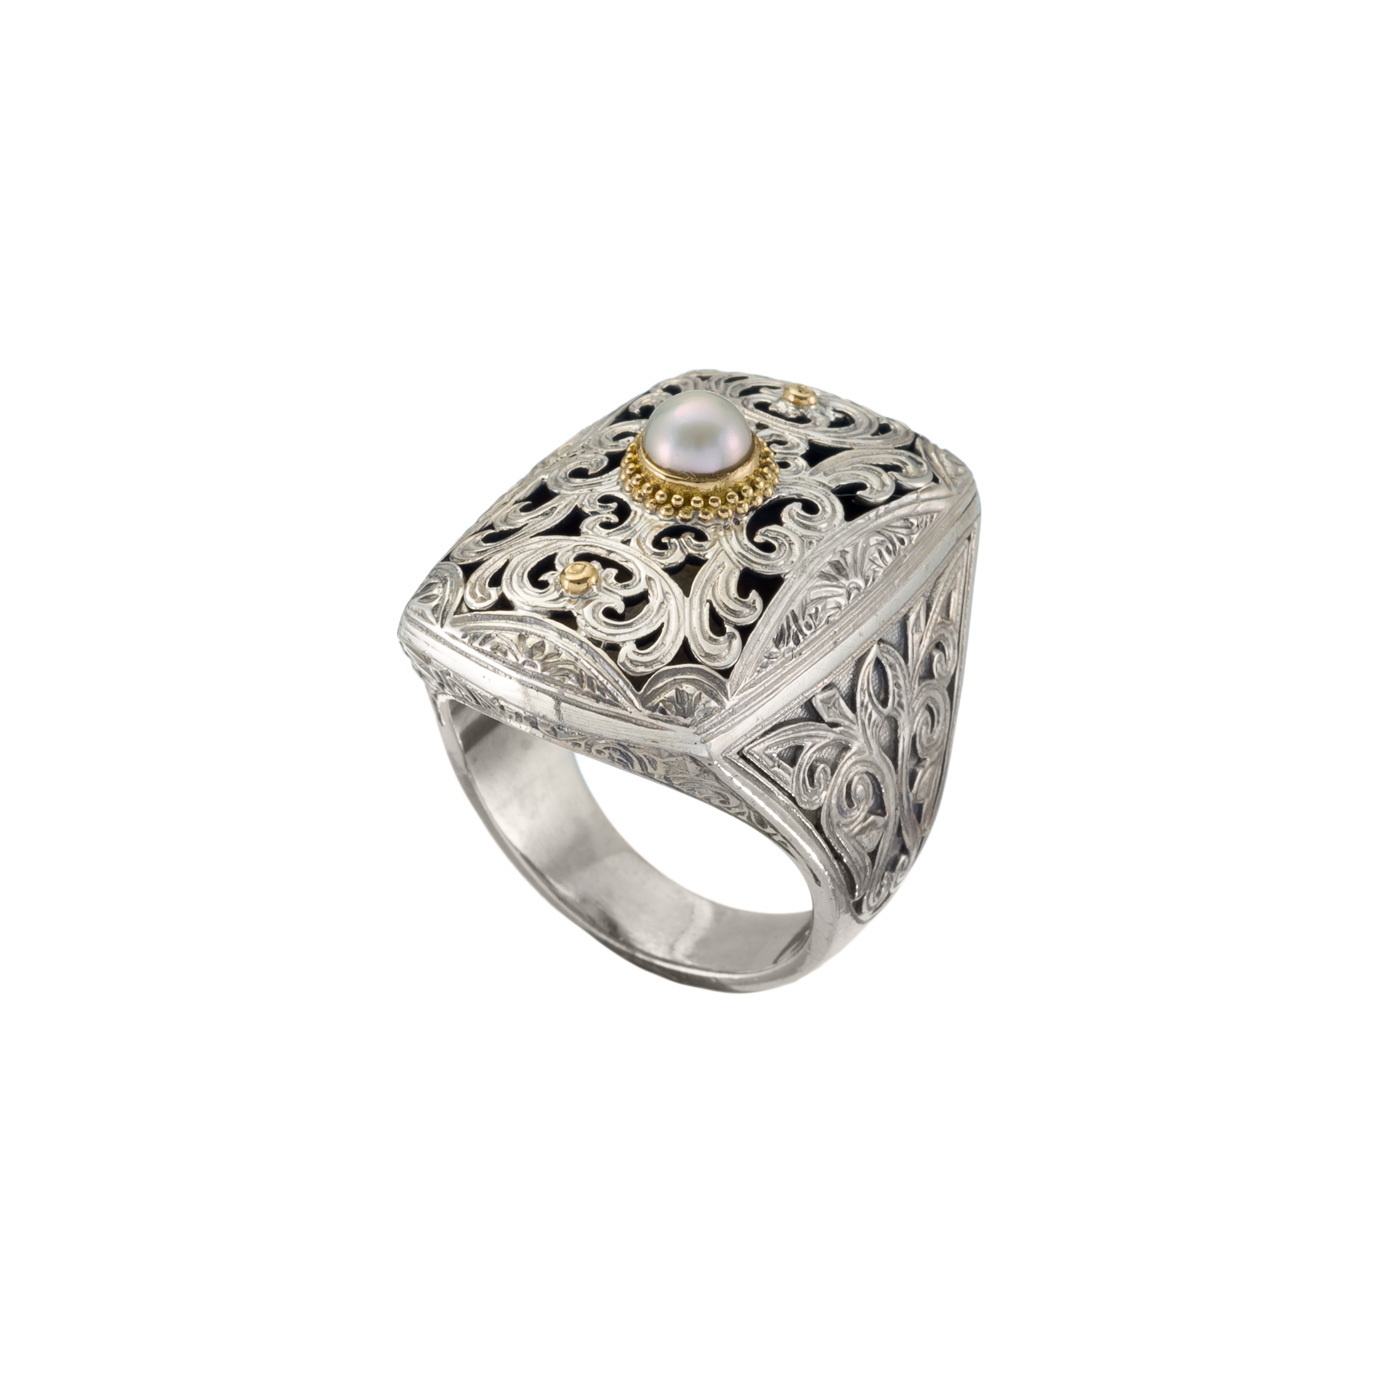 Garden shadows ring in 18K Gold and Sterling Silver with pearl